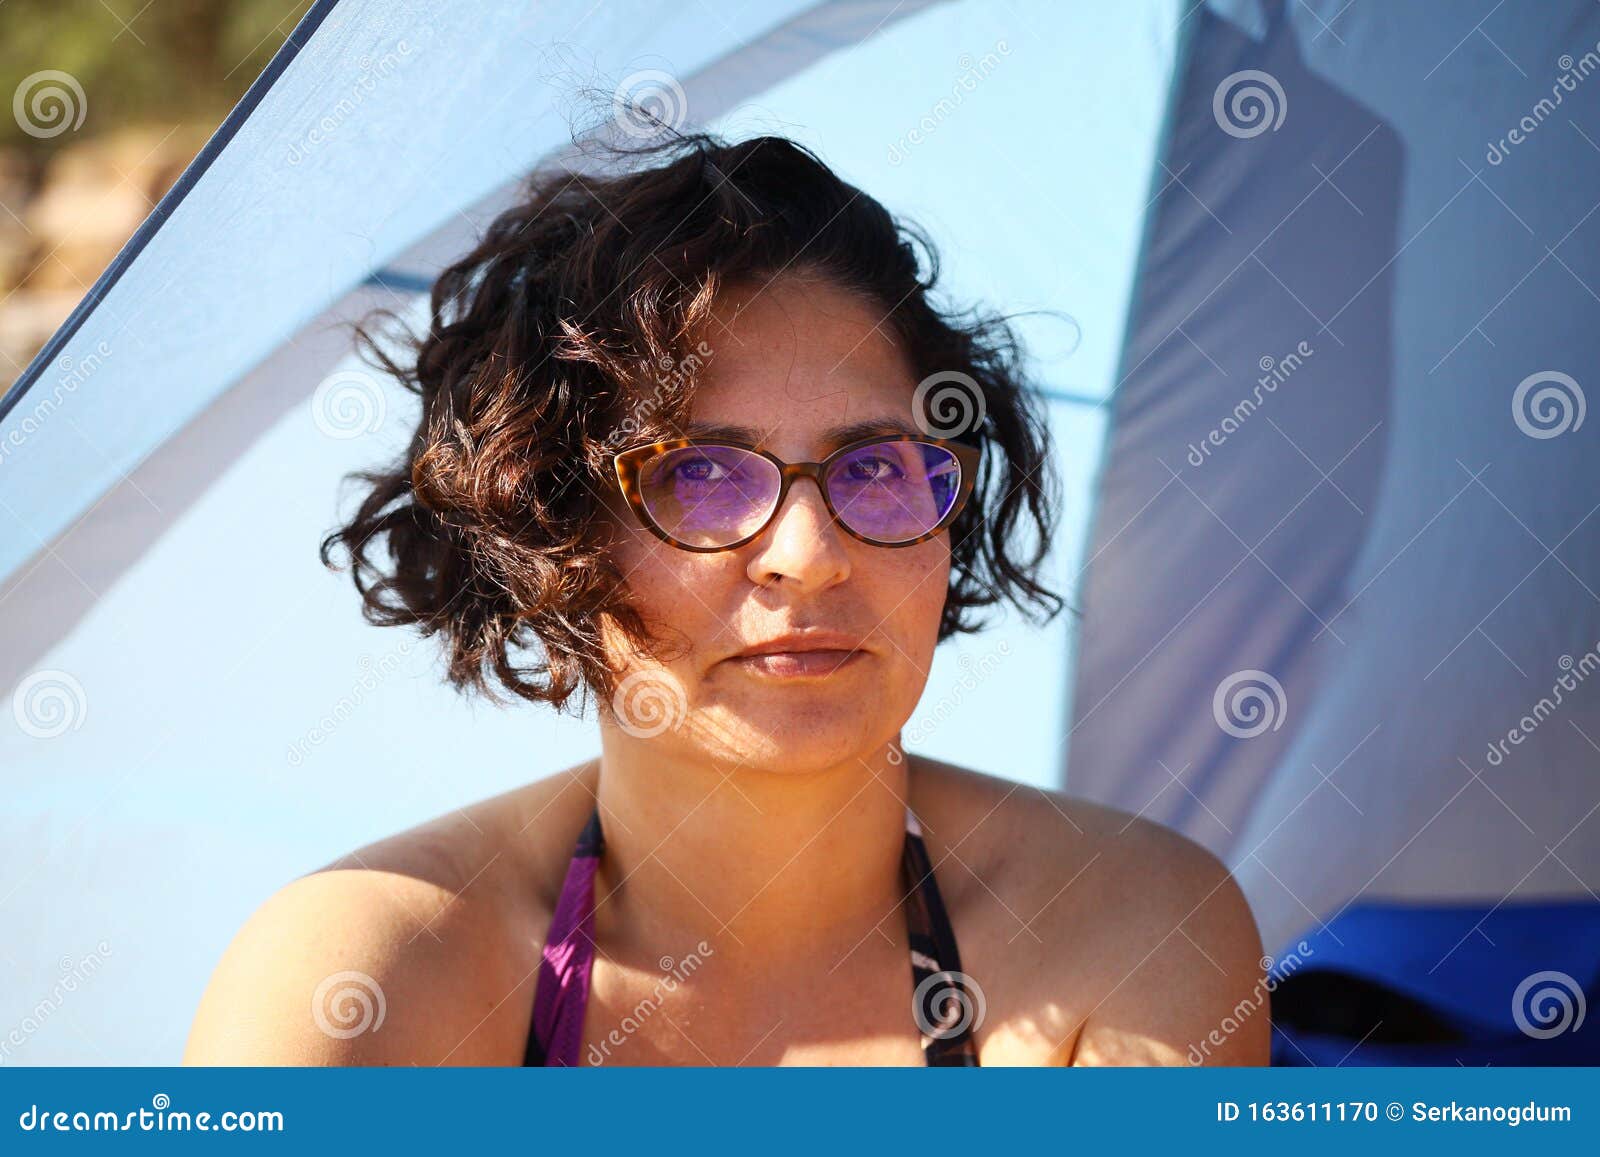 Woman With Glasses Staring At The Camera In The Beach Tent Stock Photo